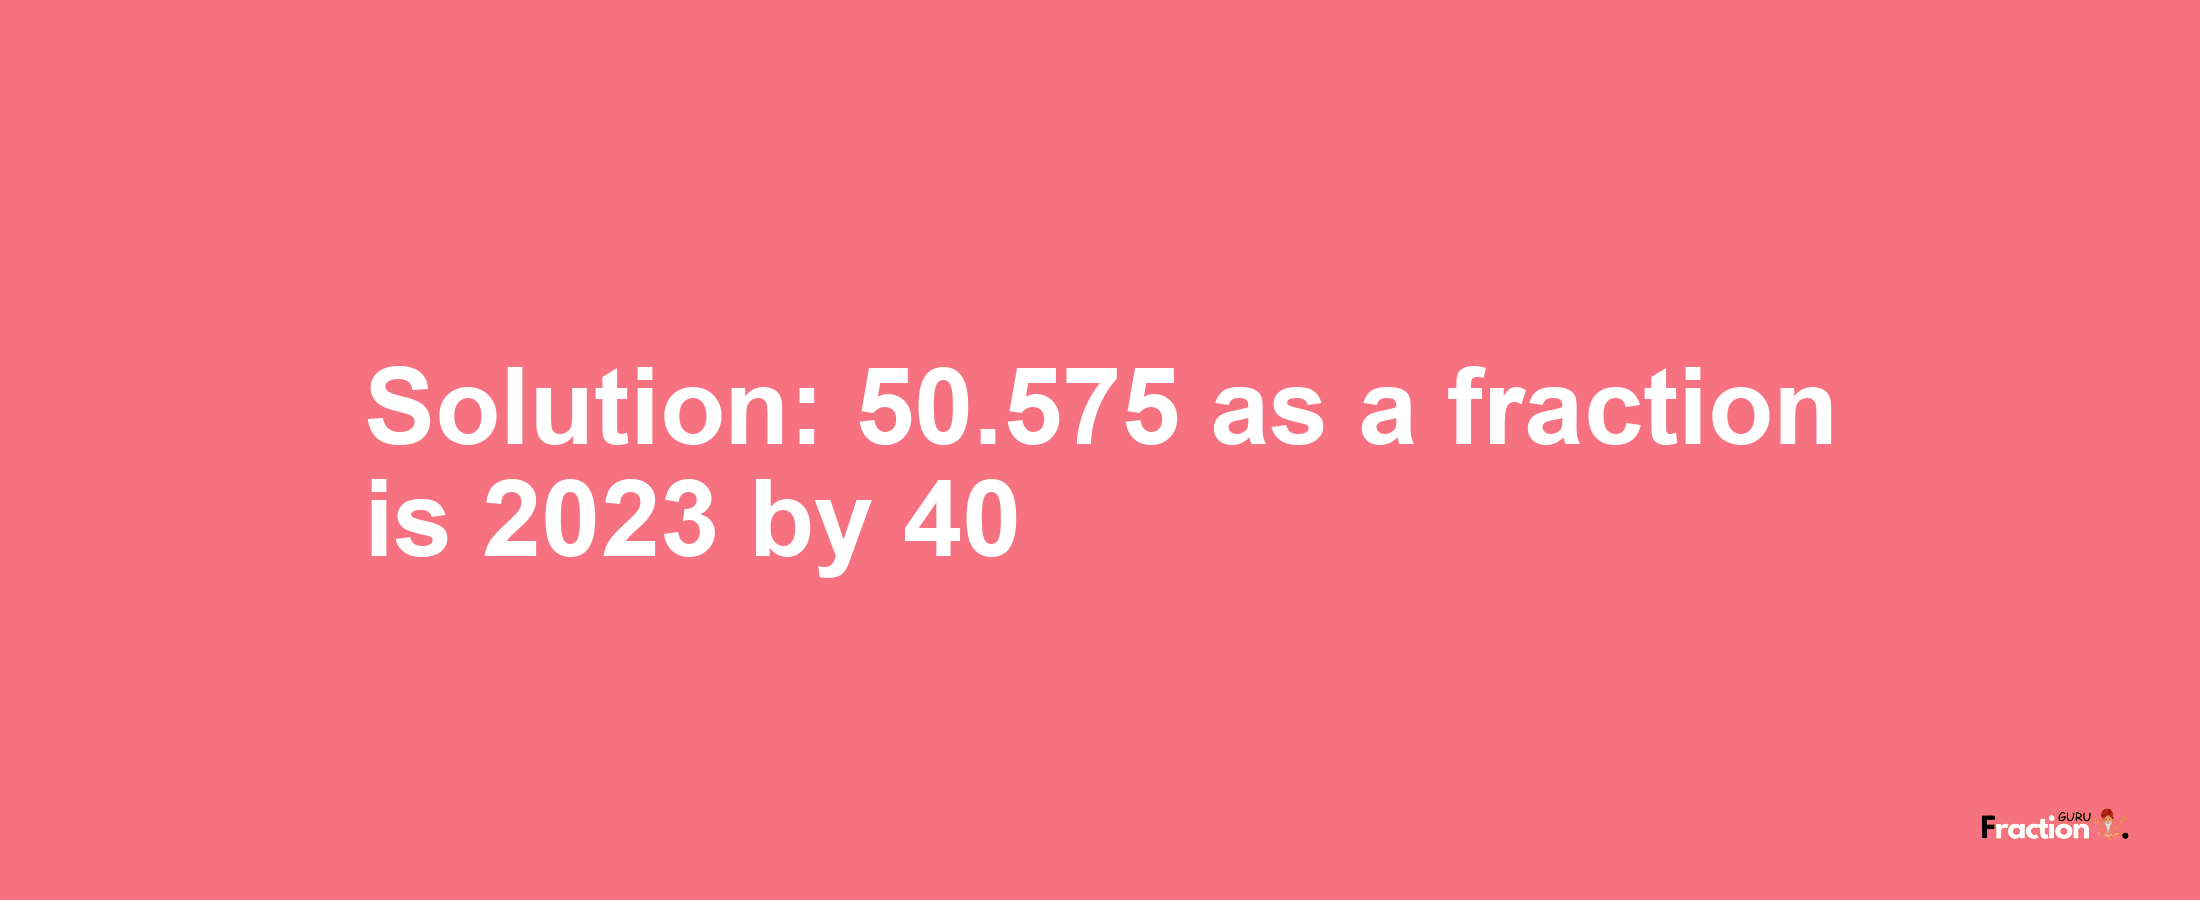 Solution:50.575 as a fraction is 2023/40